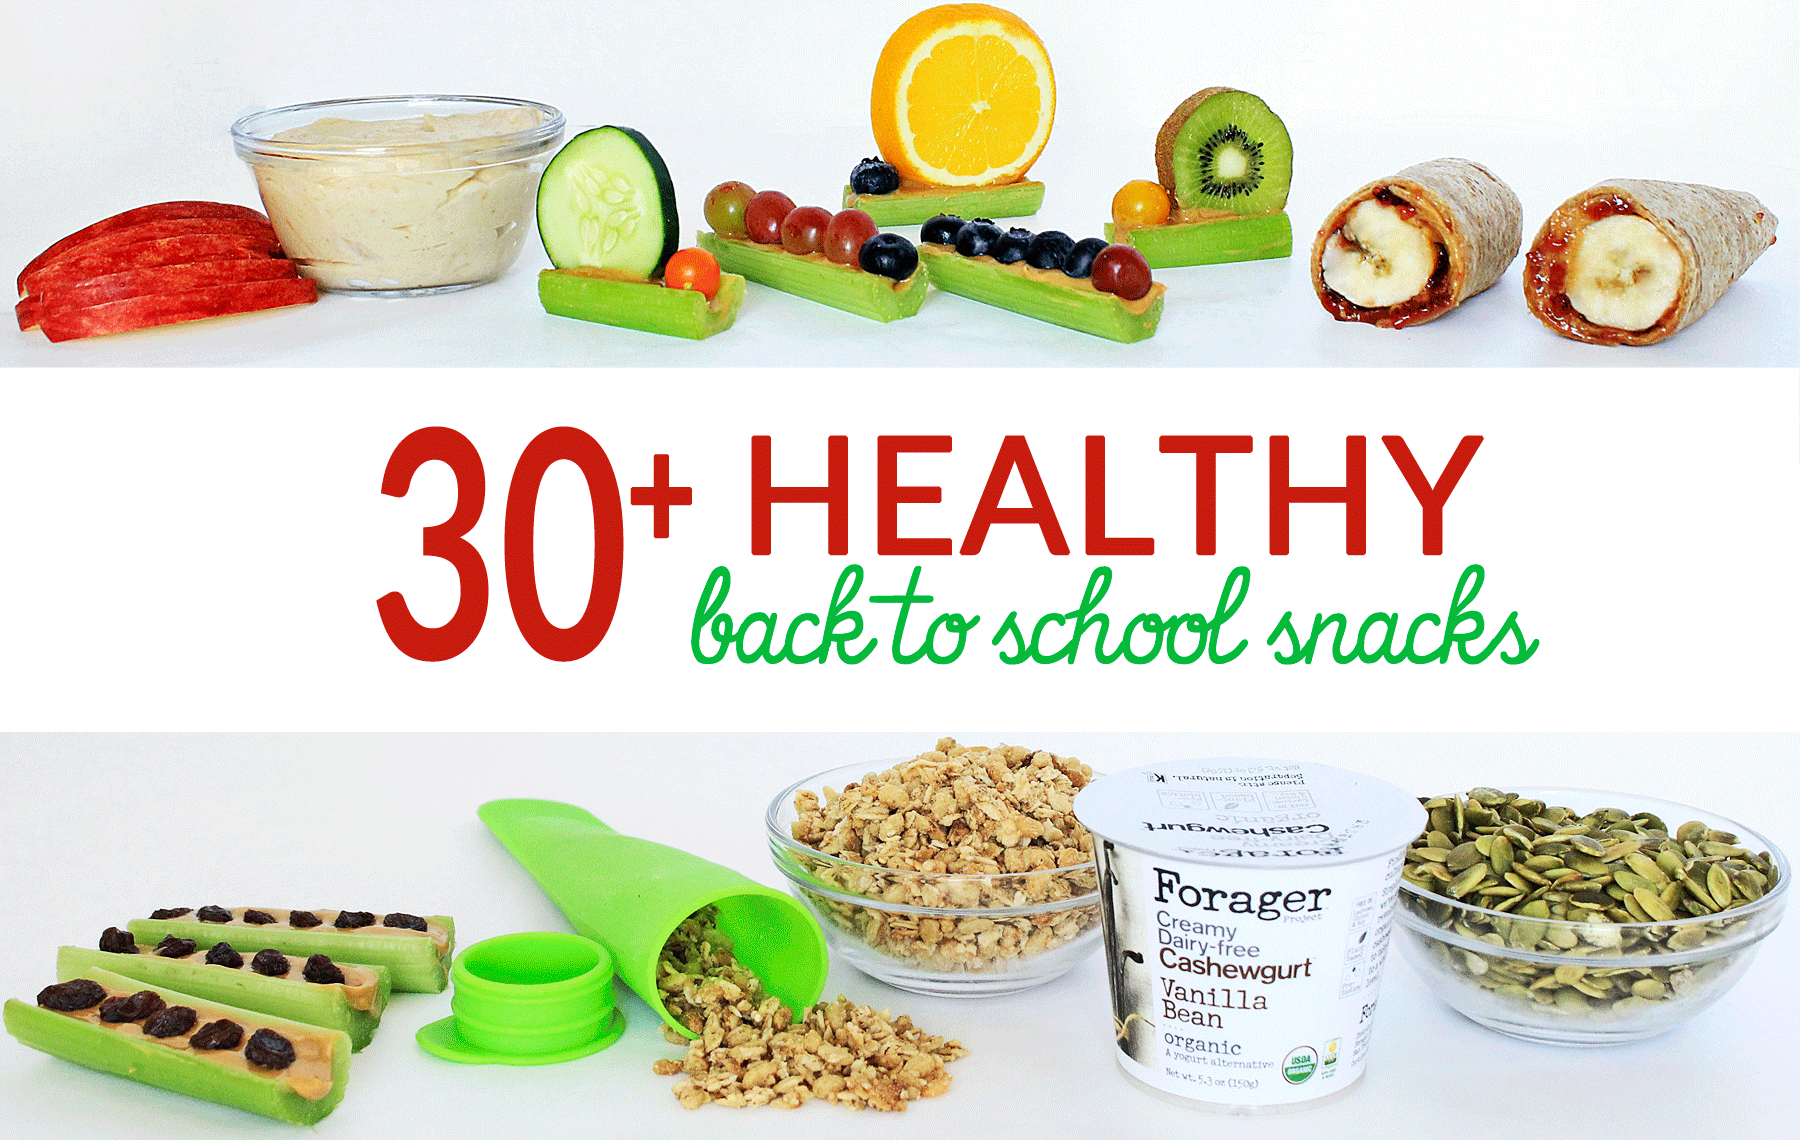 30+ Healthy Back to School Snacks Your Kids Will LOVE!